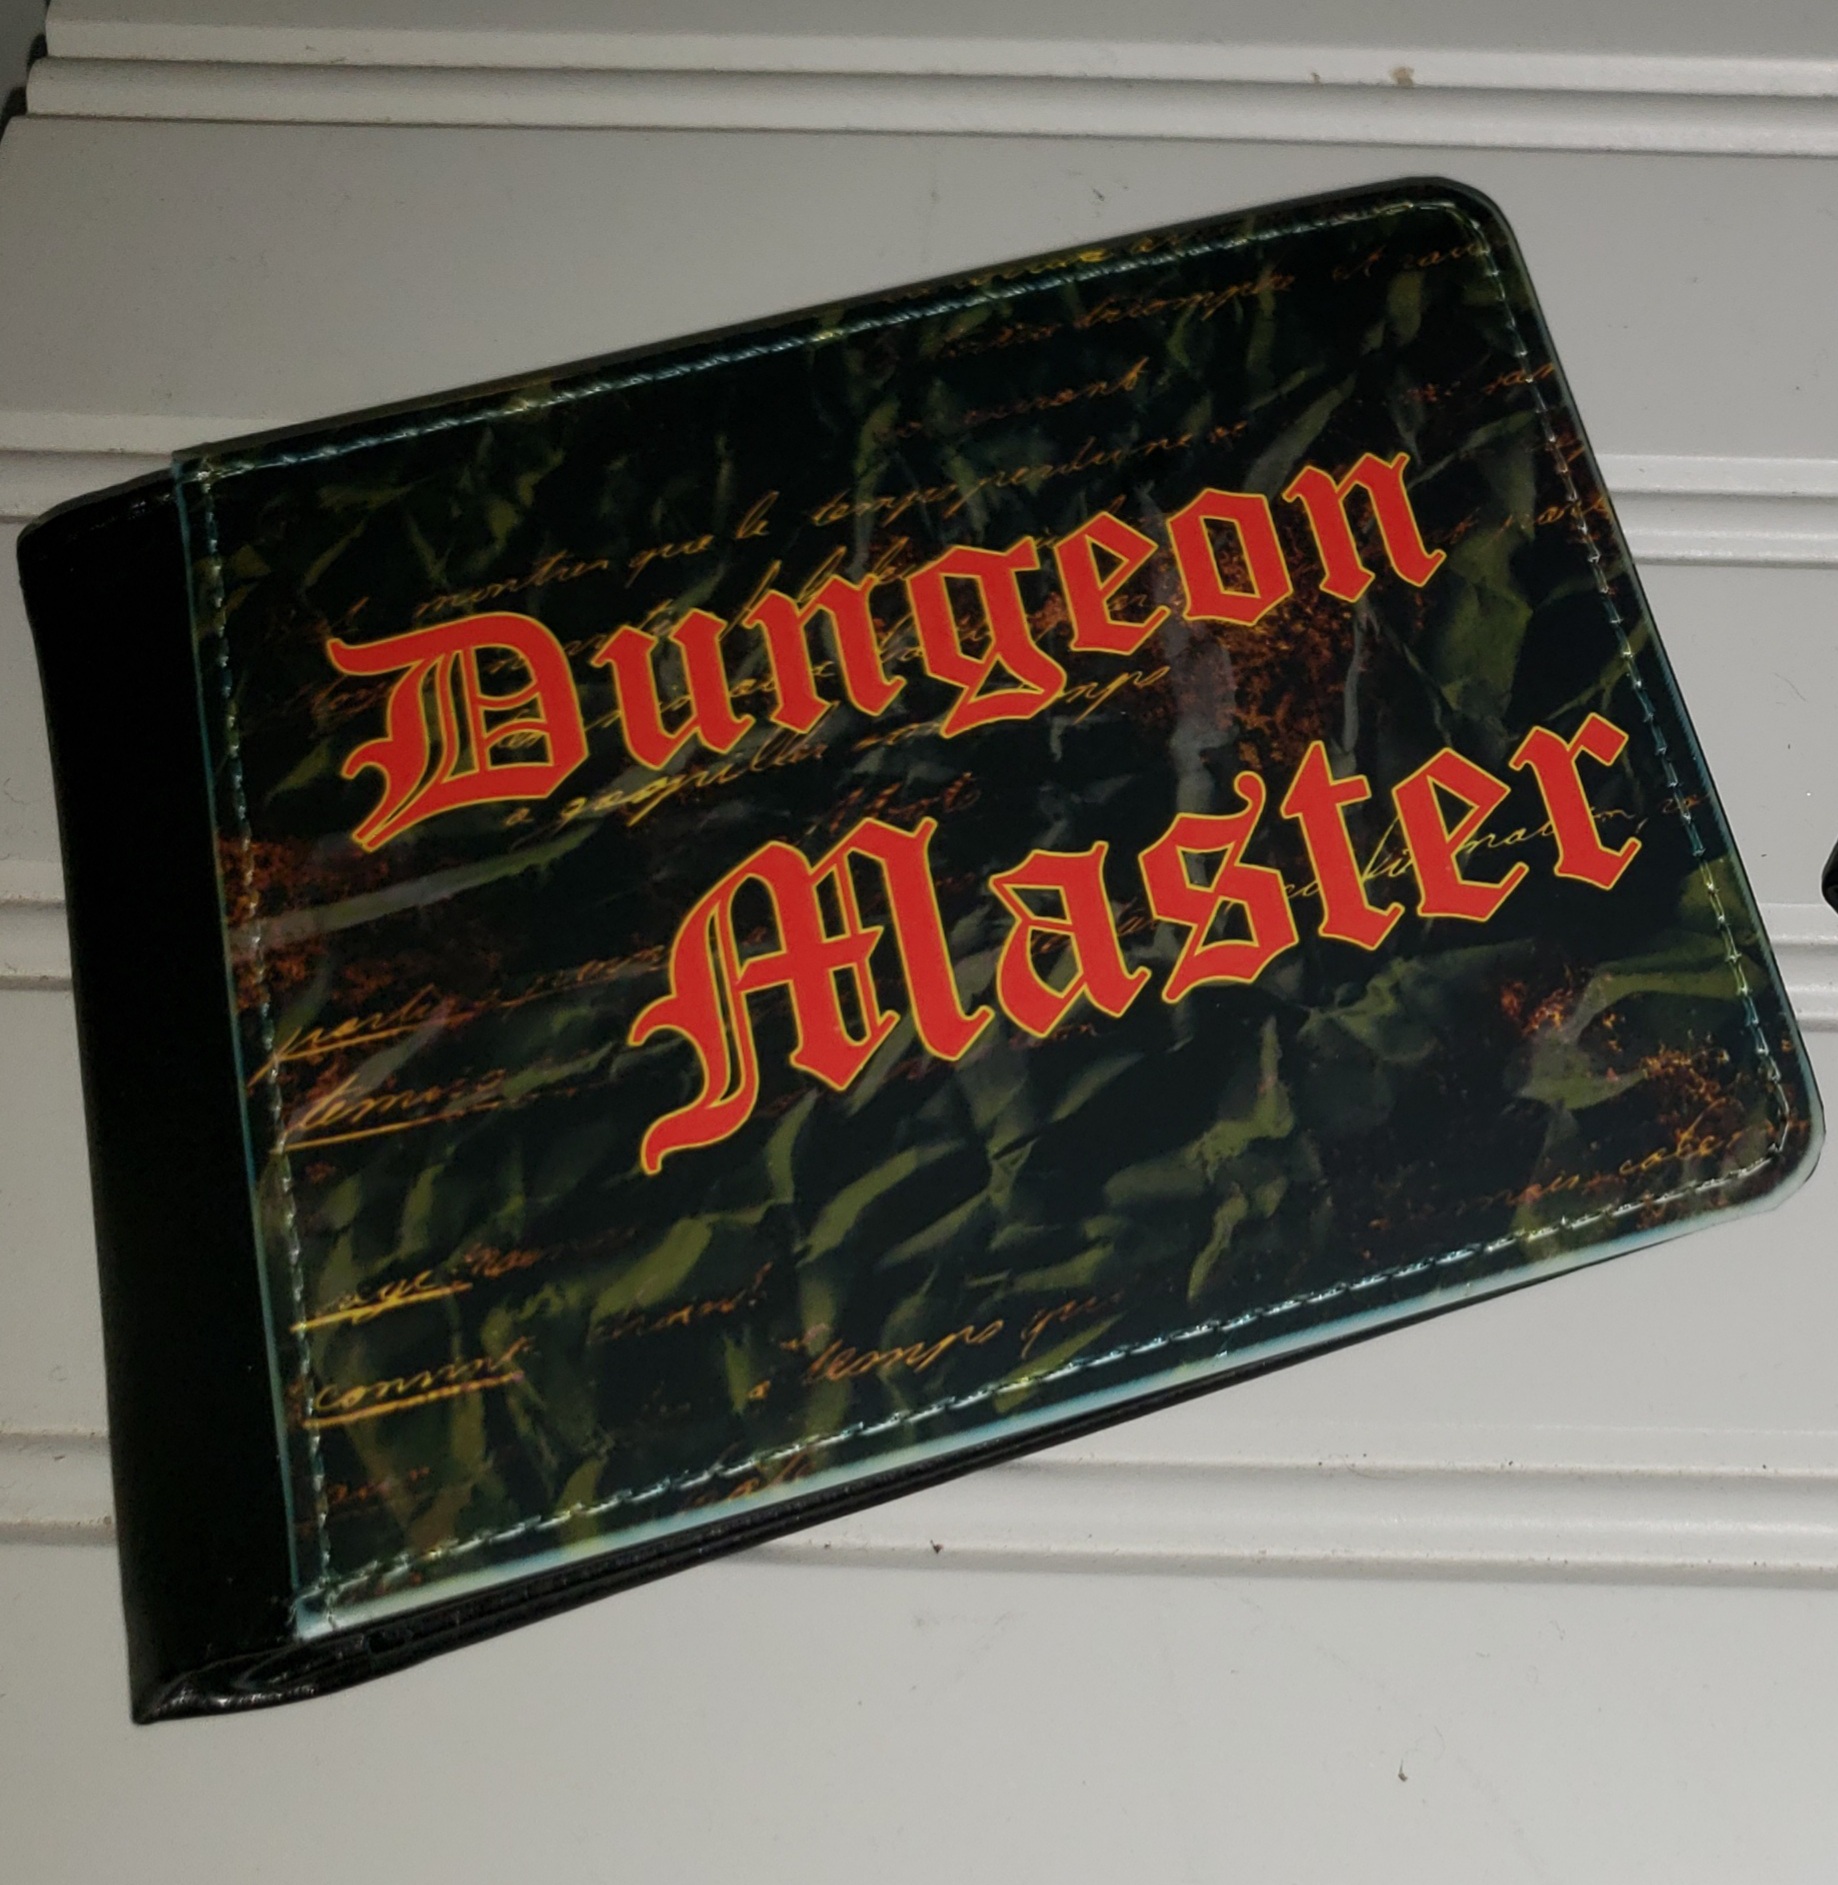 Perfect gift for a D&D dungeon master! This wallet sublimates so beautifully.